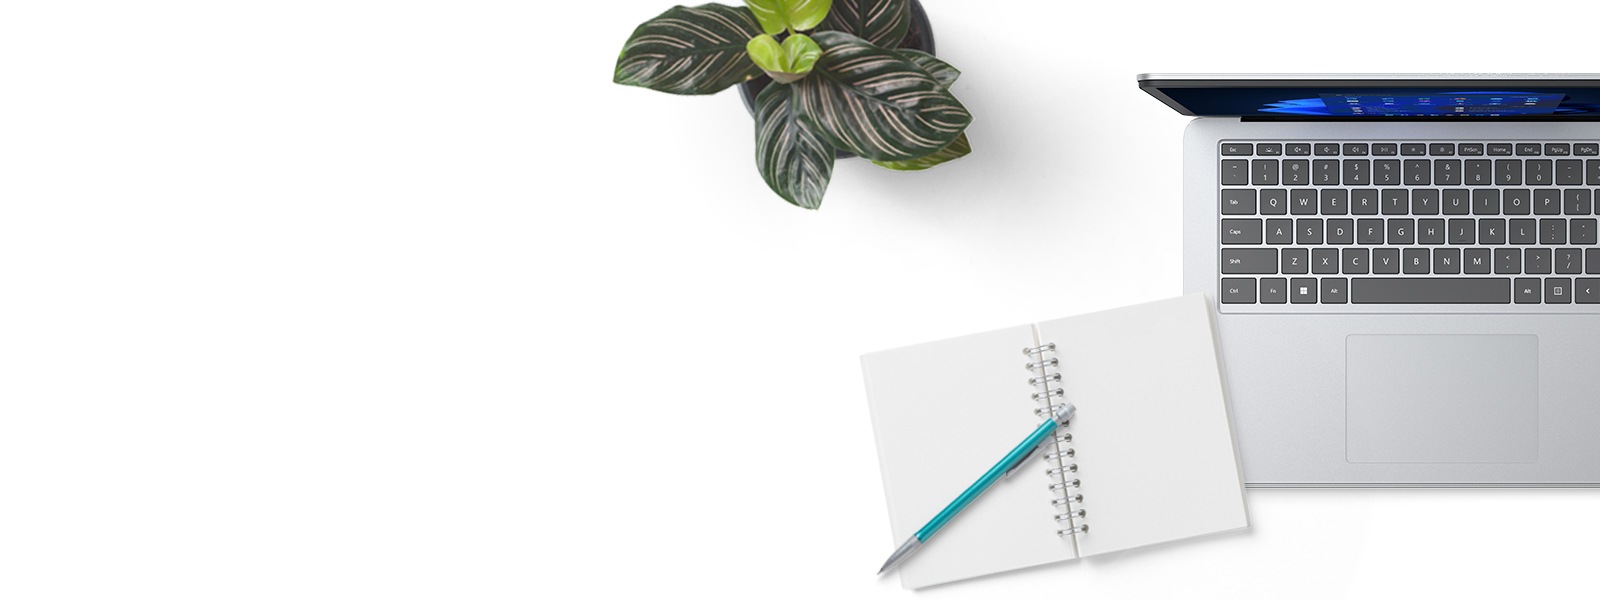 A Surface device is seen with a plant and a notepad and pen nearby